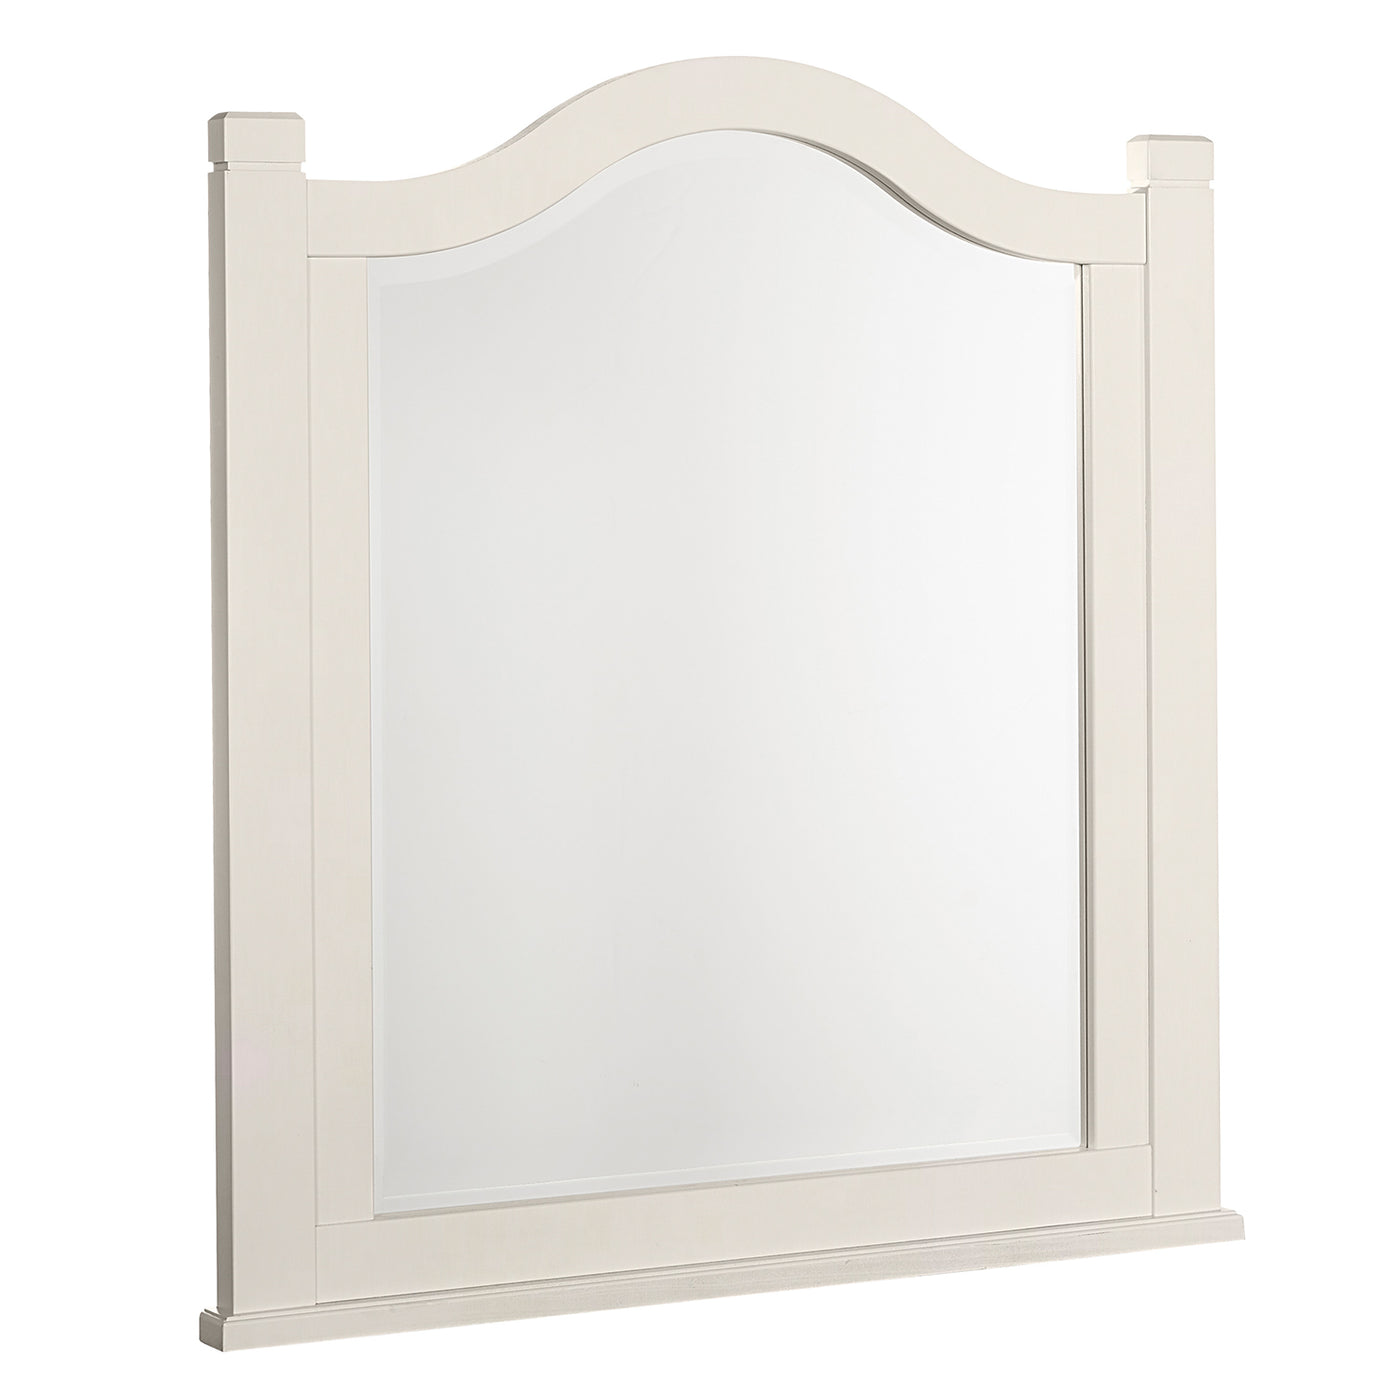 LMCo. Bungalow Collection Arch Mirror